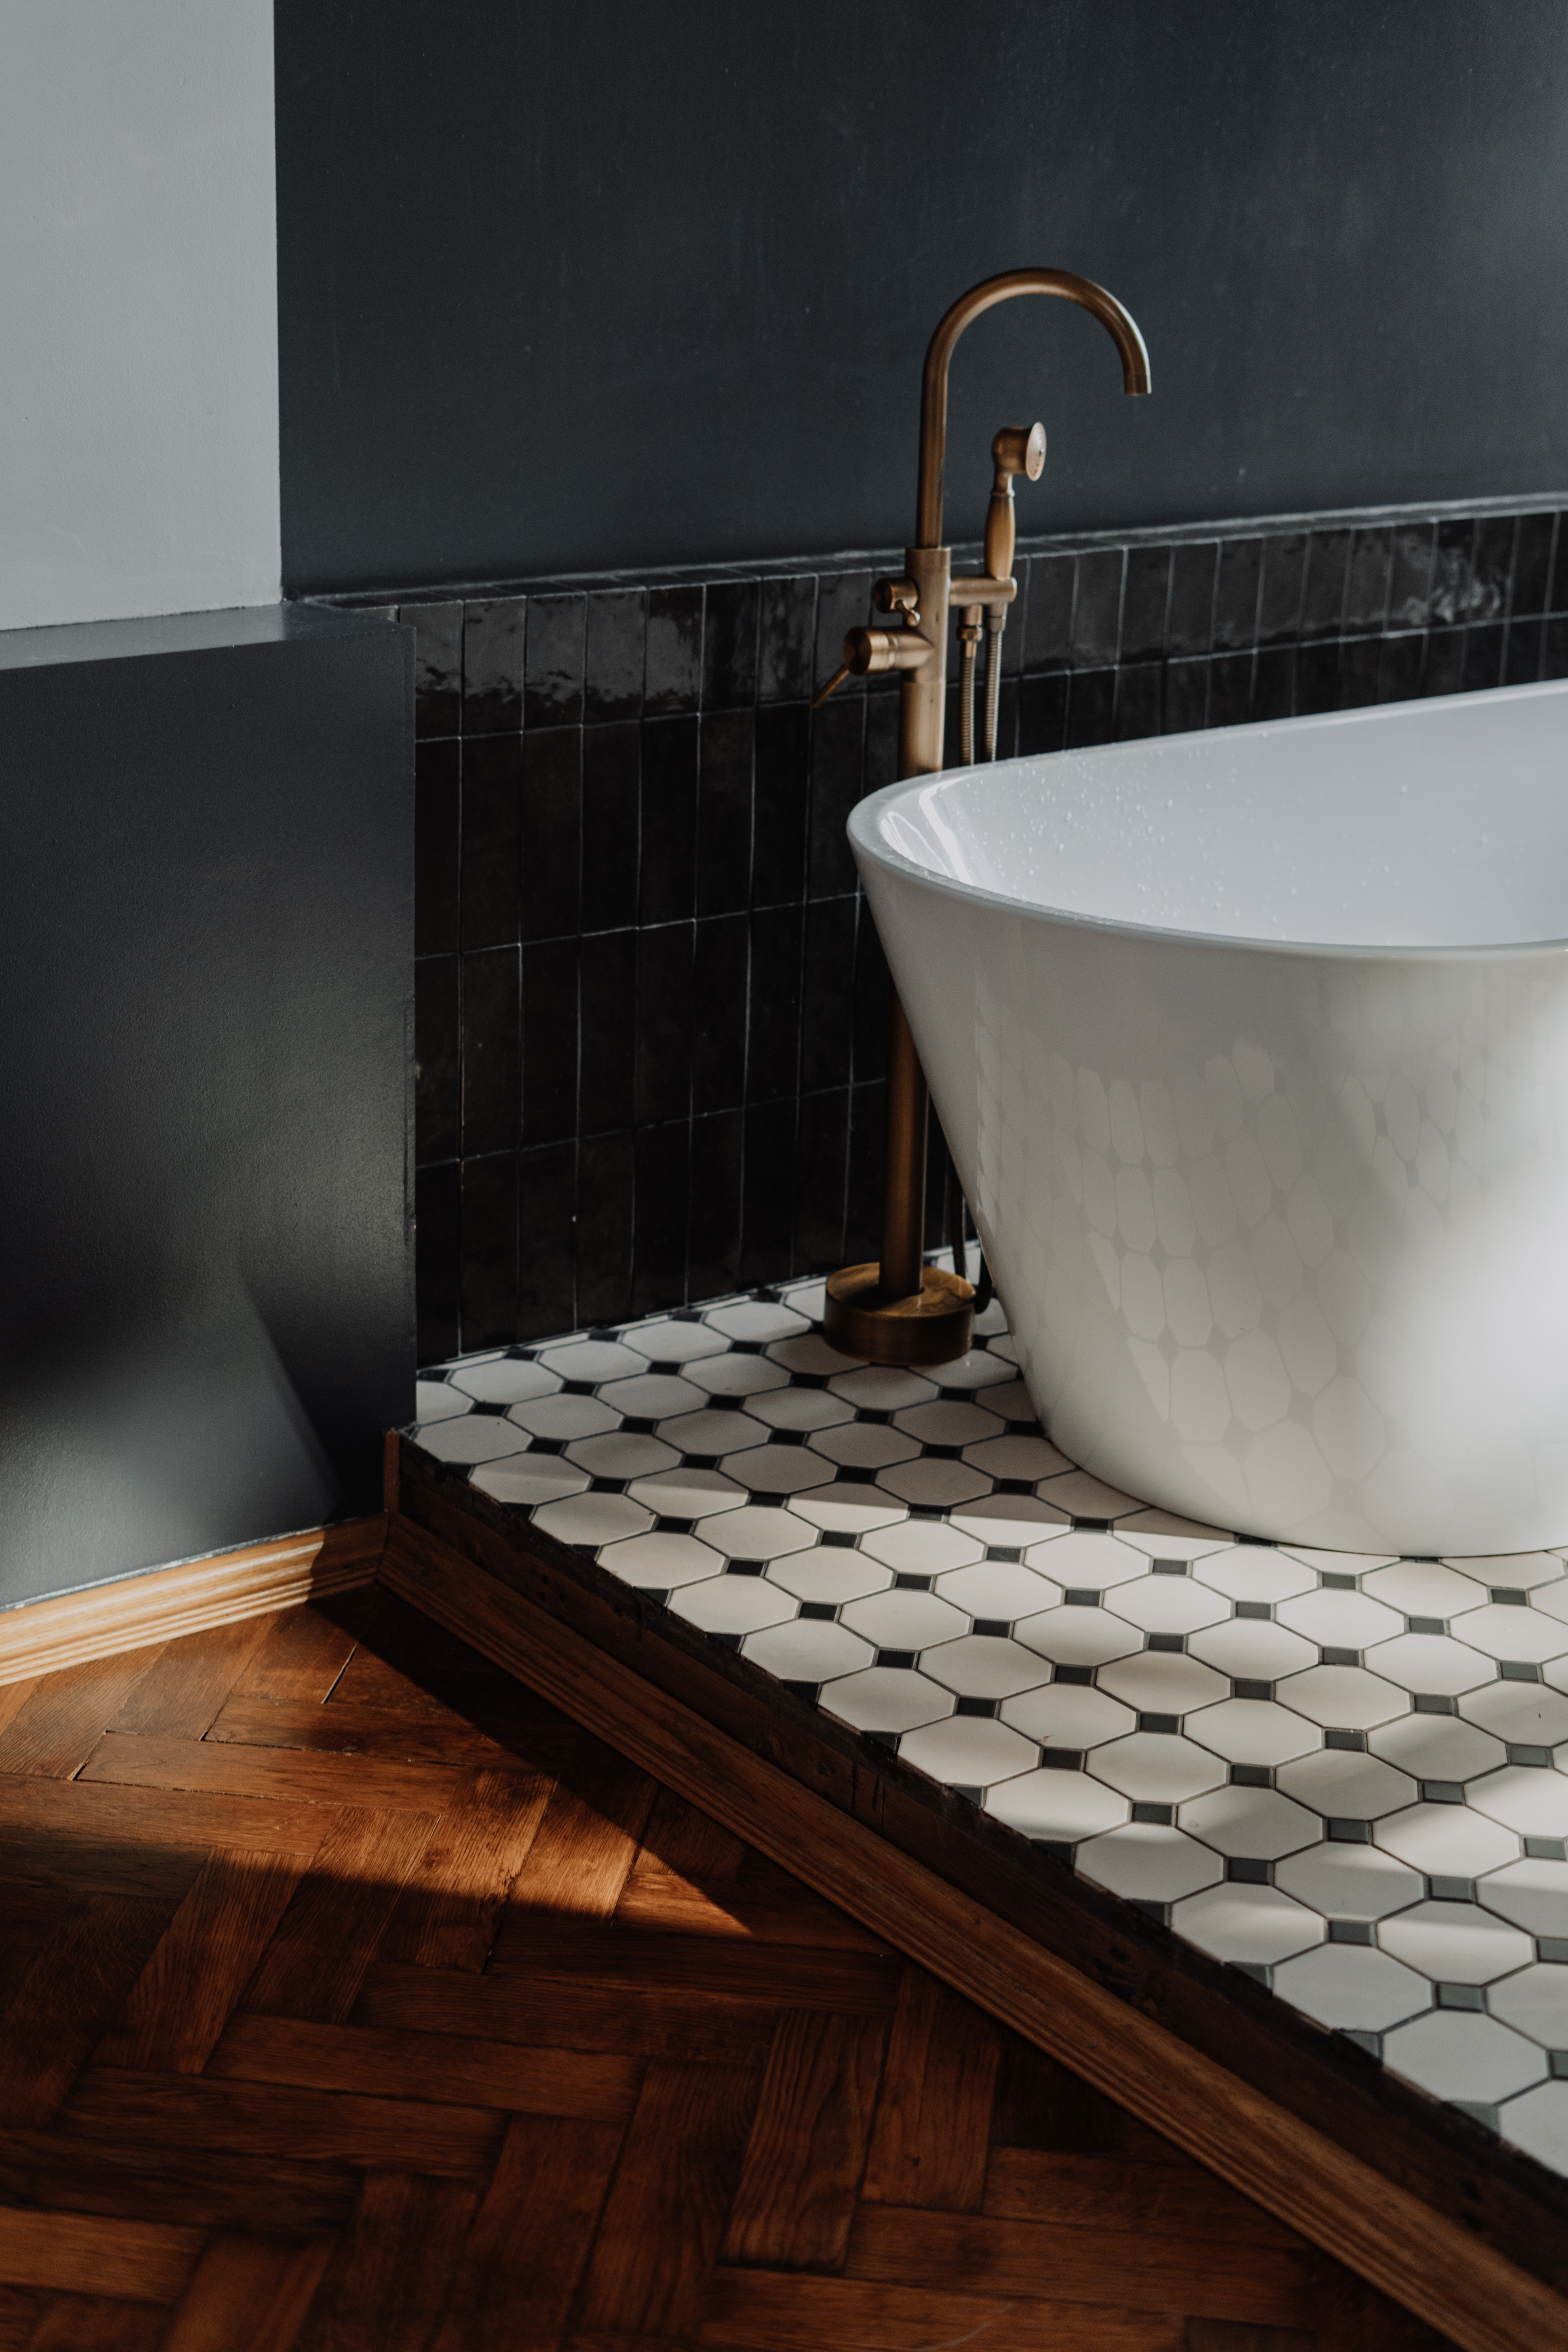 Vertical stacked gloss black metro tiles sit behind a modern freestanding bathtub. Underneath it are stylish back and white mosaic floor tiles in a geometric shape.